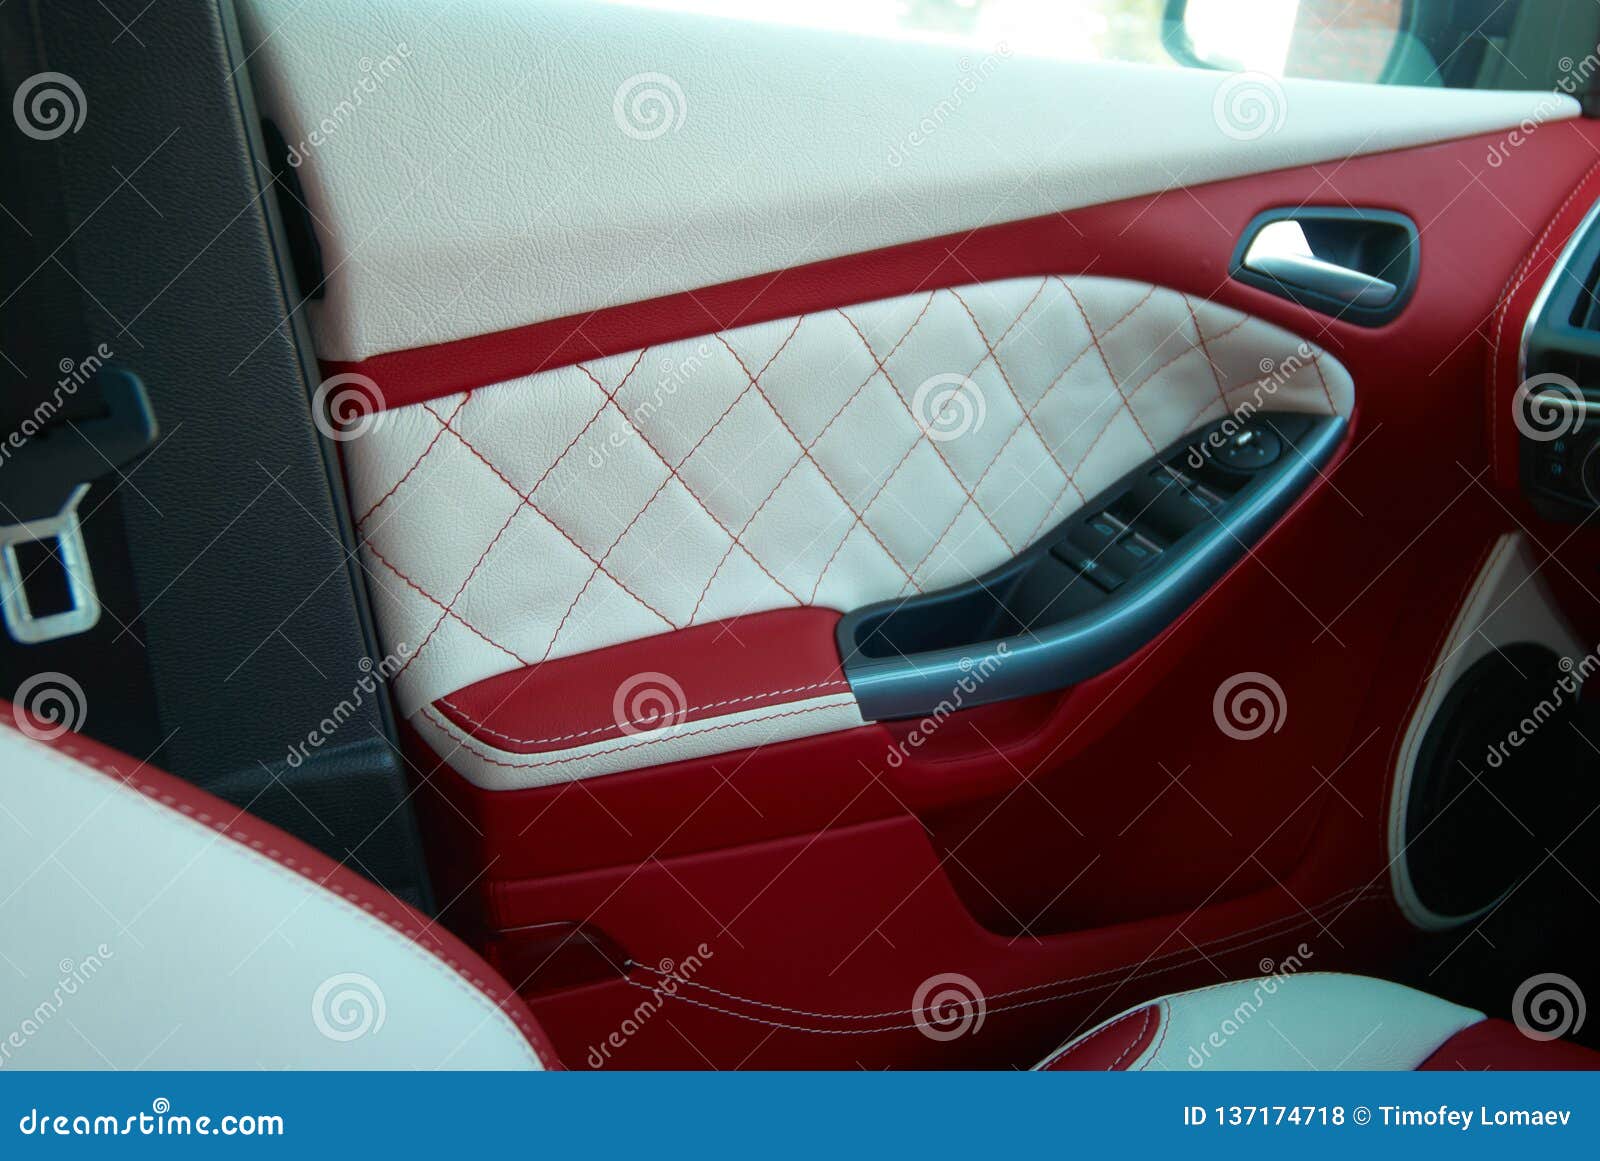 Car Doors Car Interior Details White Red Leather With